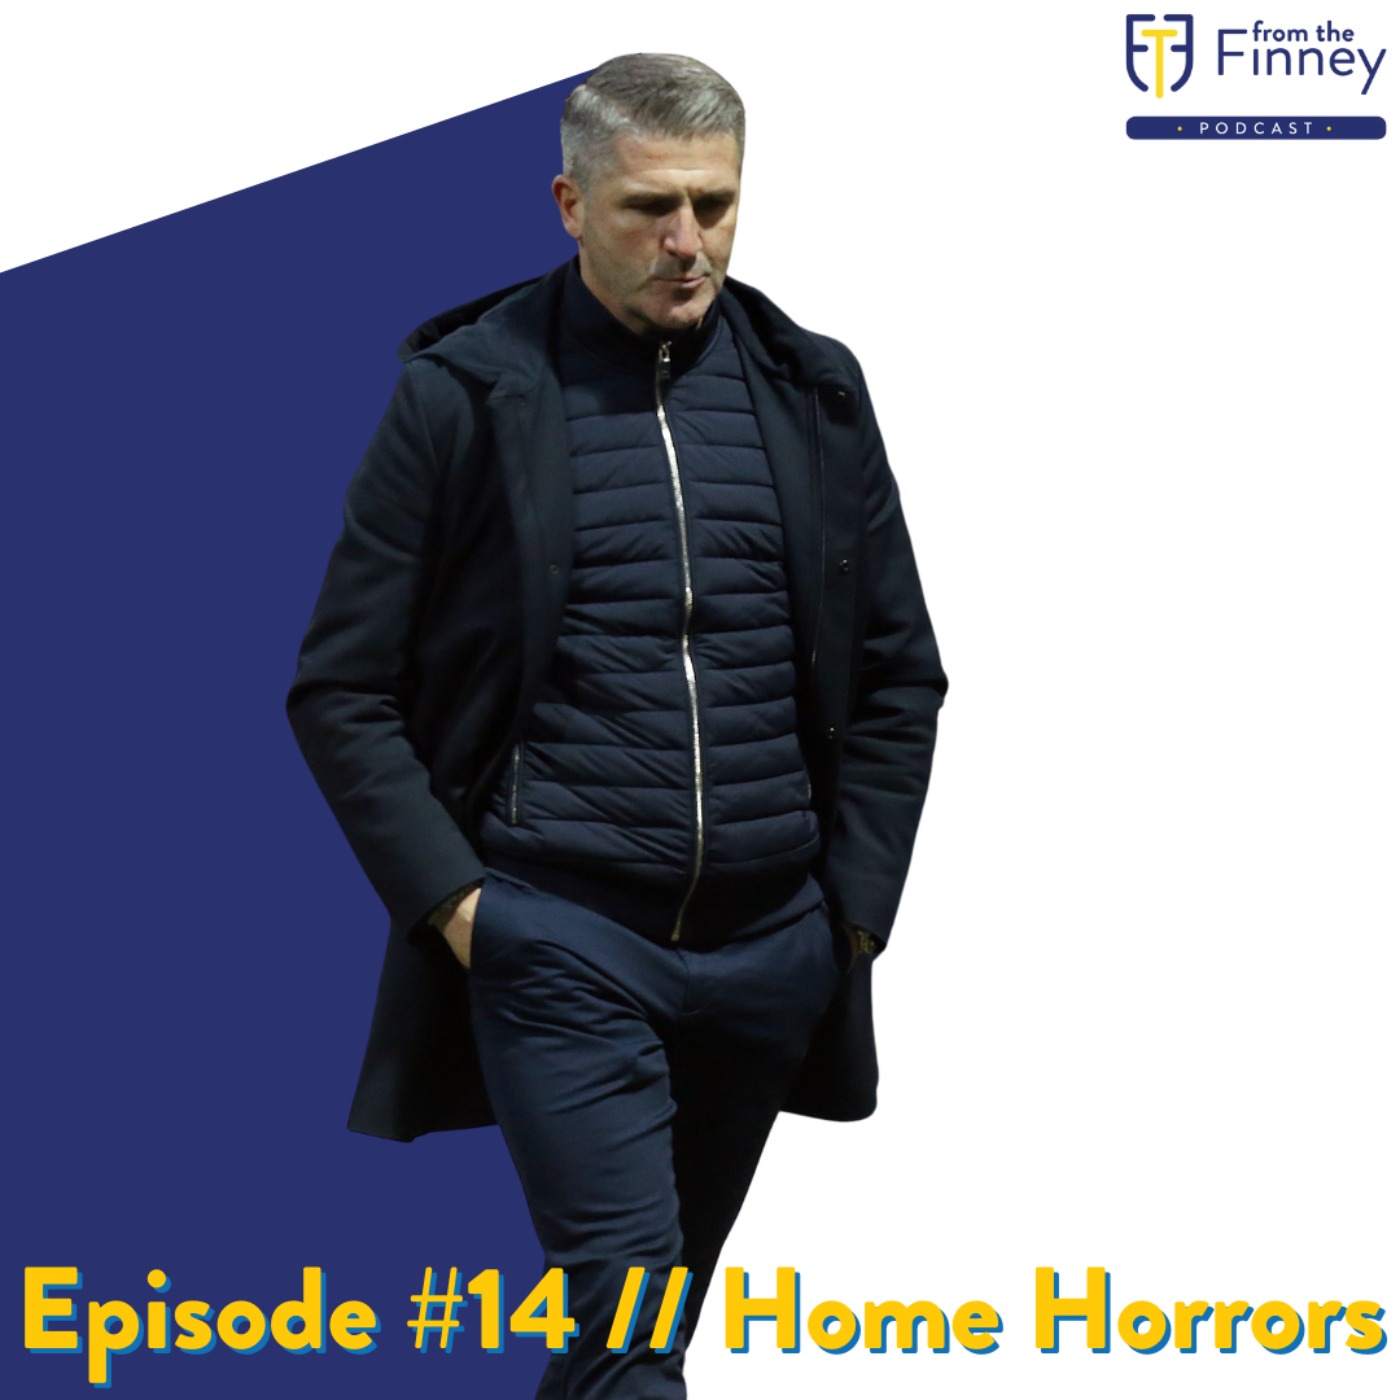 Episode #14 // Home Horrors // From the Finney Podcast